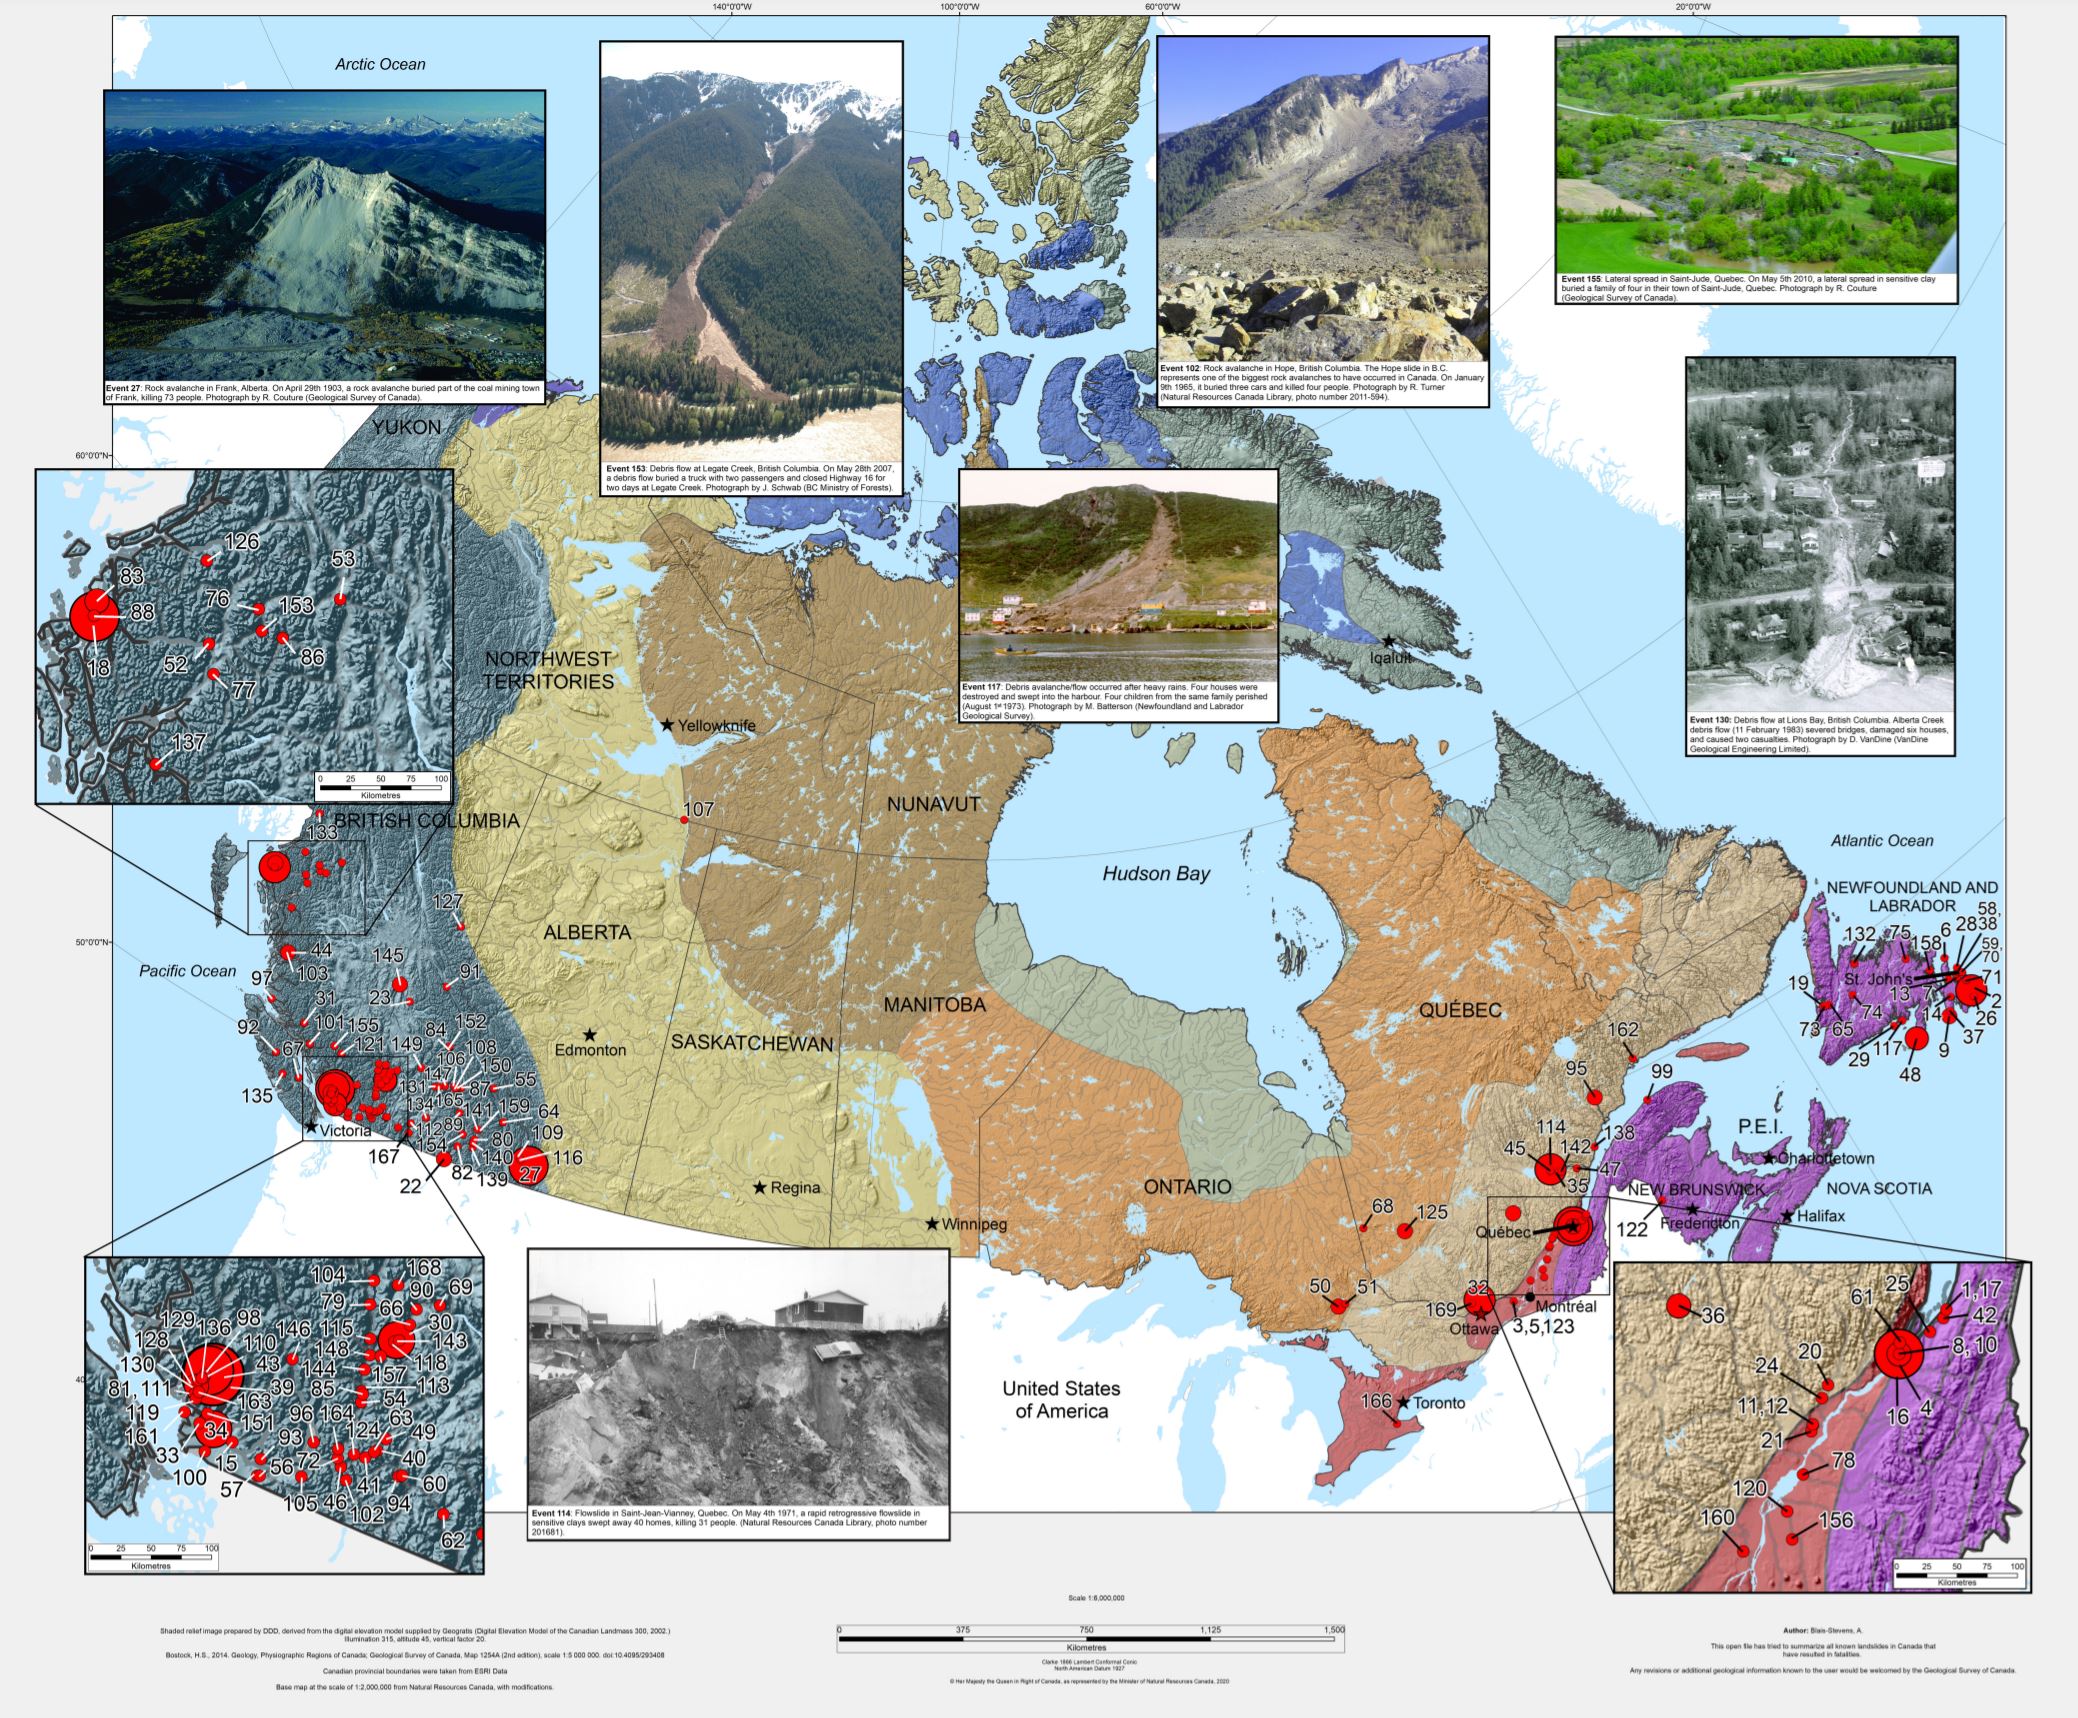 A map showing historical landslides in Canada, from Blais-Stevens (2020).